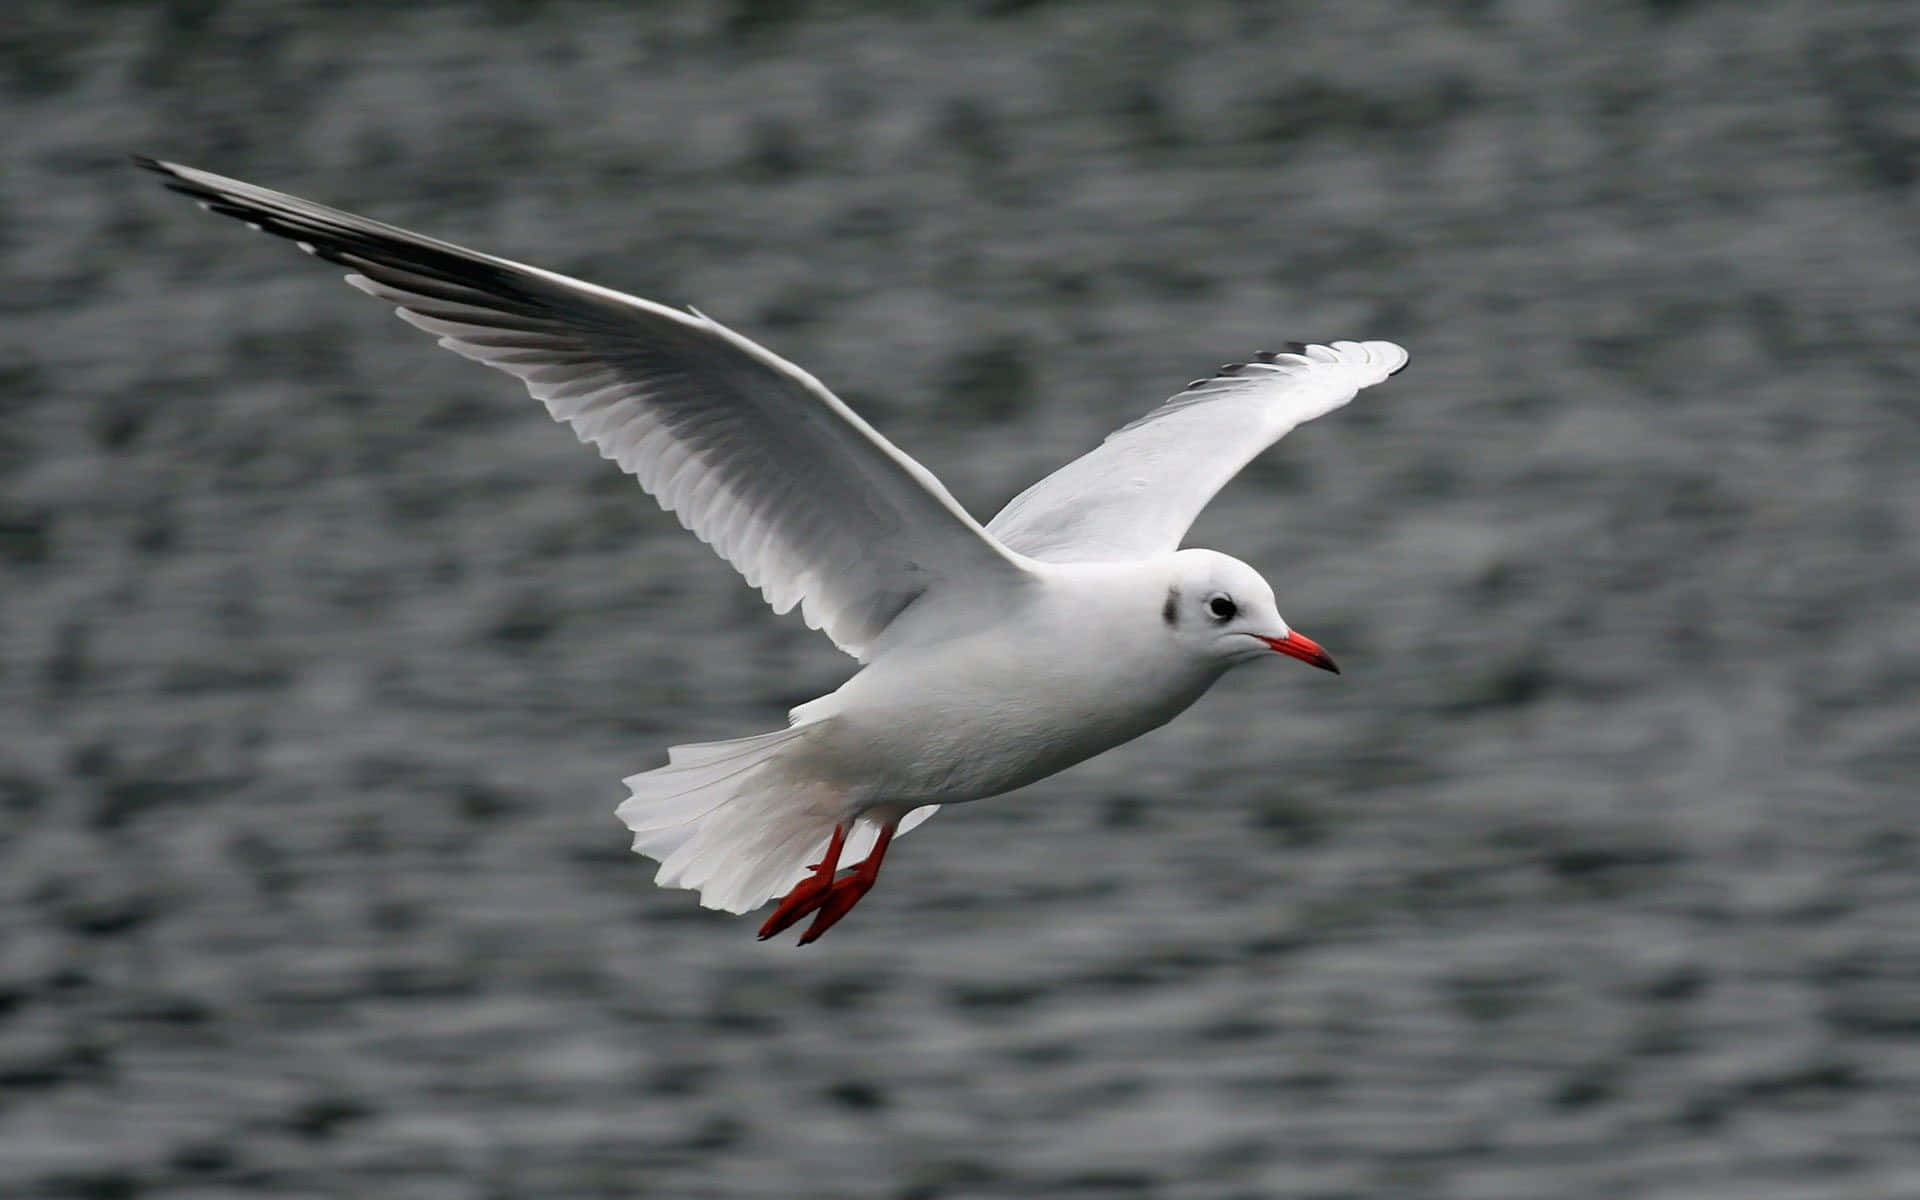 Graceful Seagull Soaring High In The Sky Background